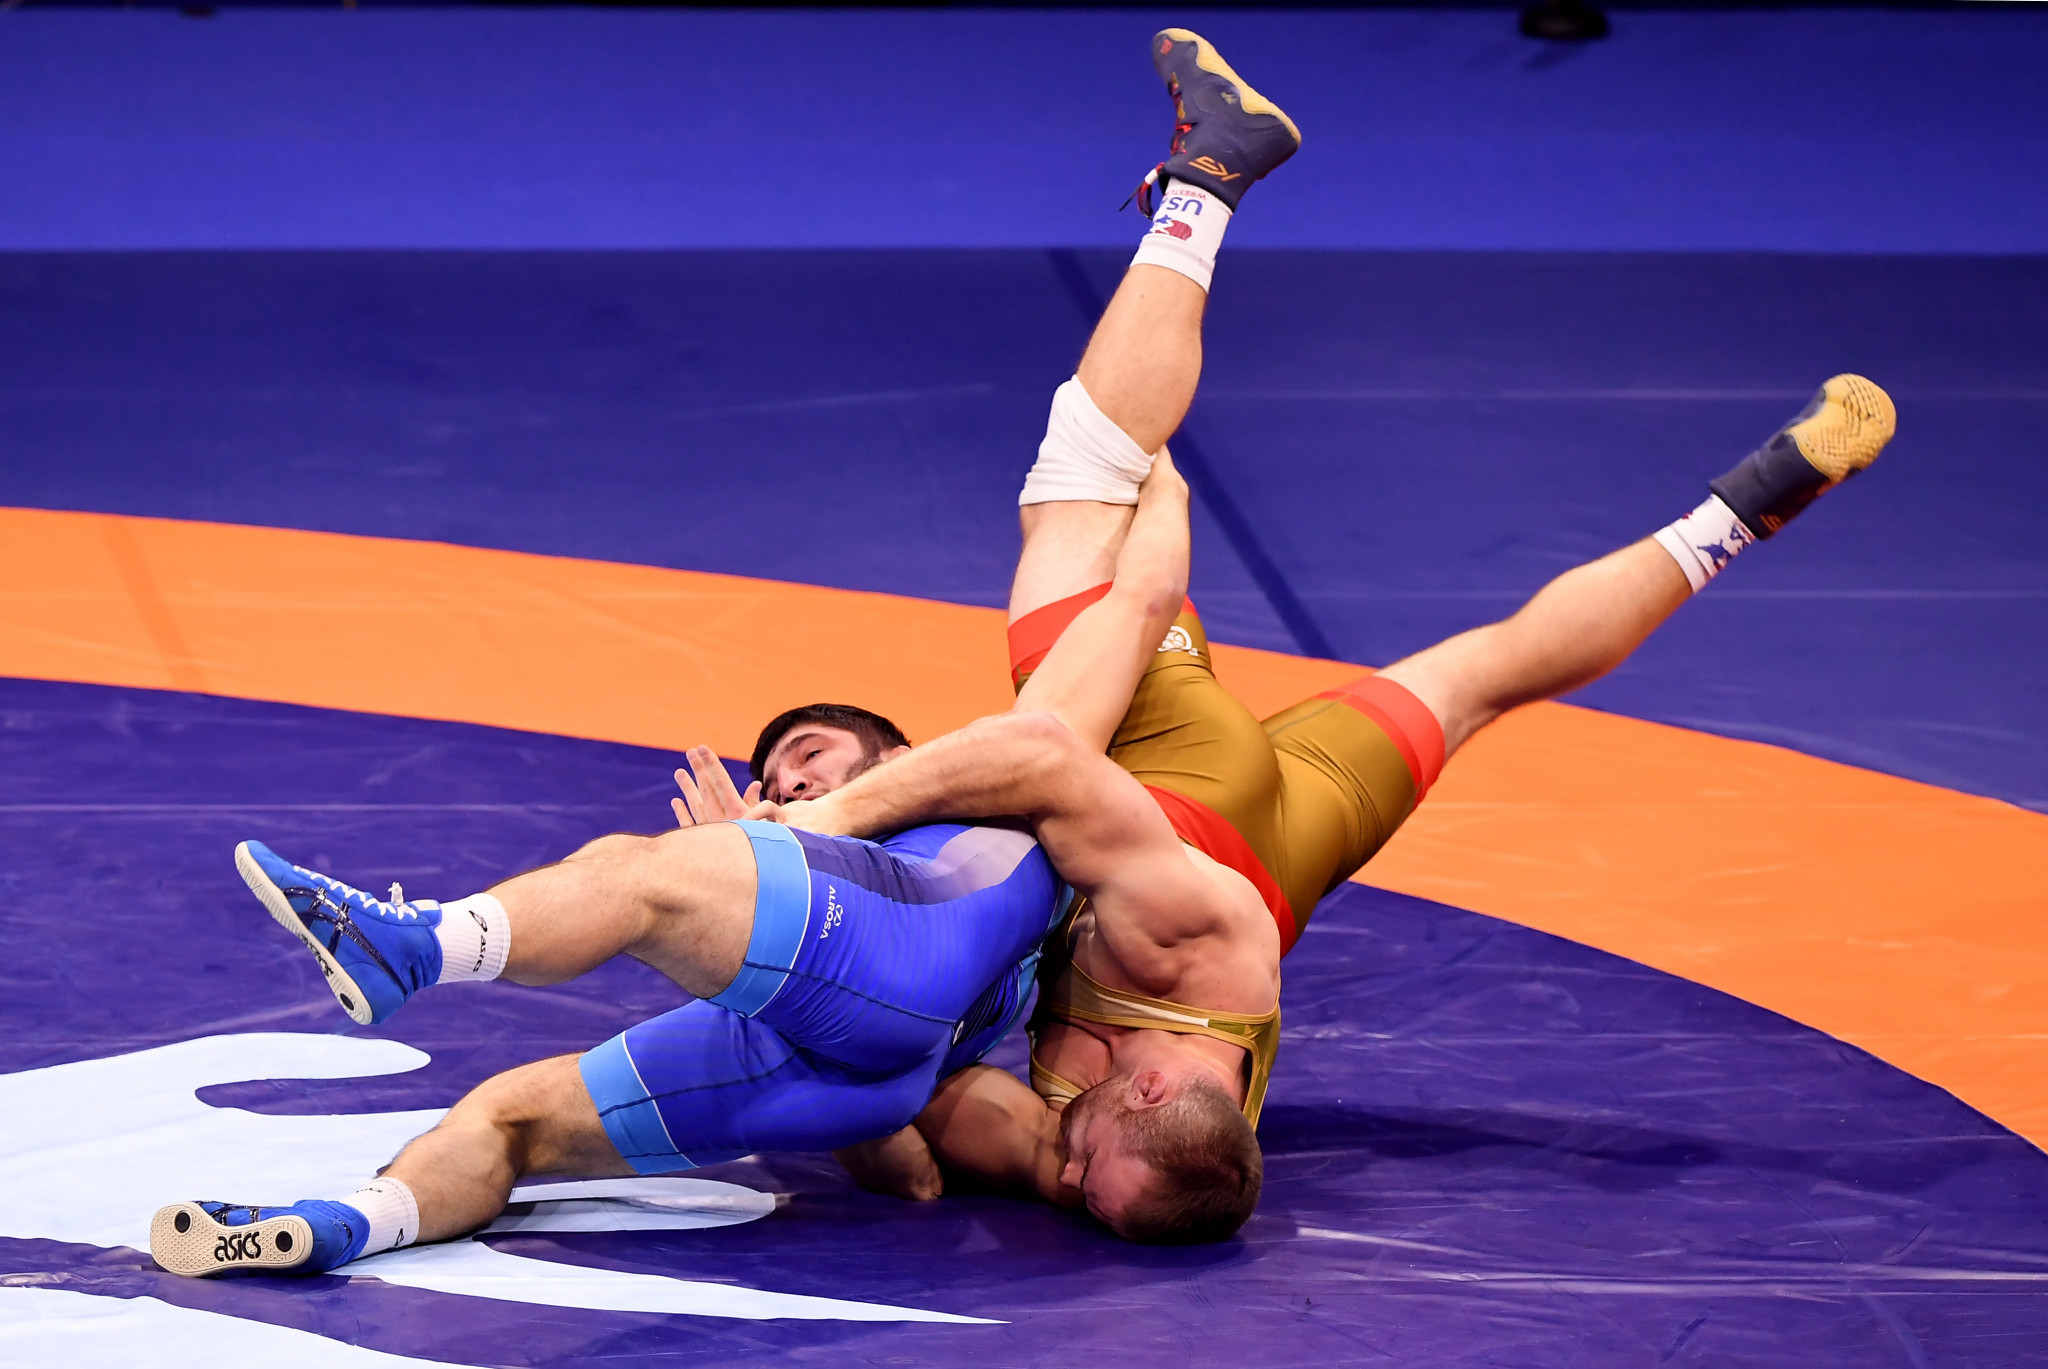 Russia and the United States have five qualifiers to date - including Abdulrashid Sadulaev, in blue, and Kyle Snyder, in gold ©Getty Images